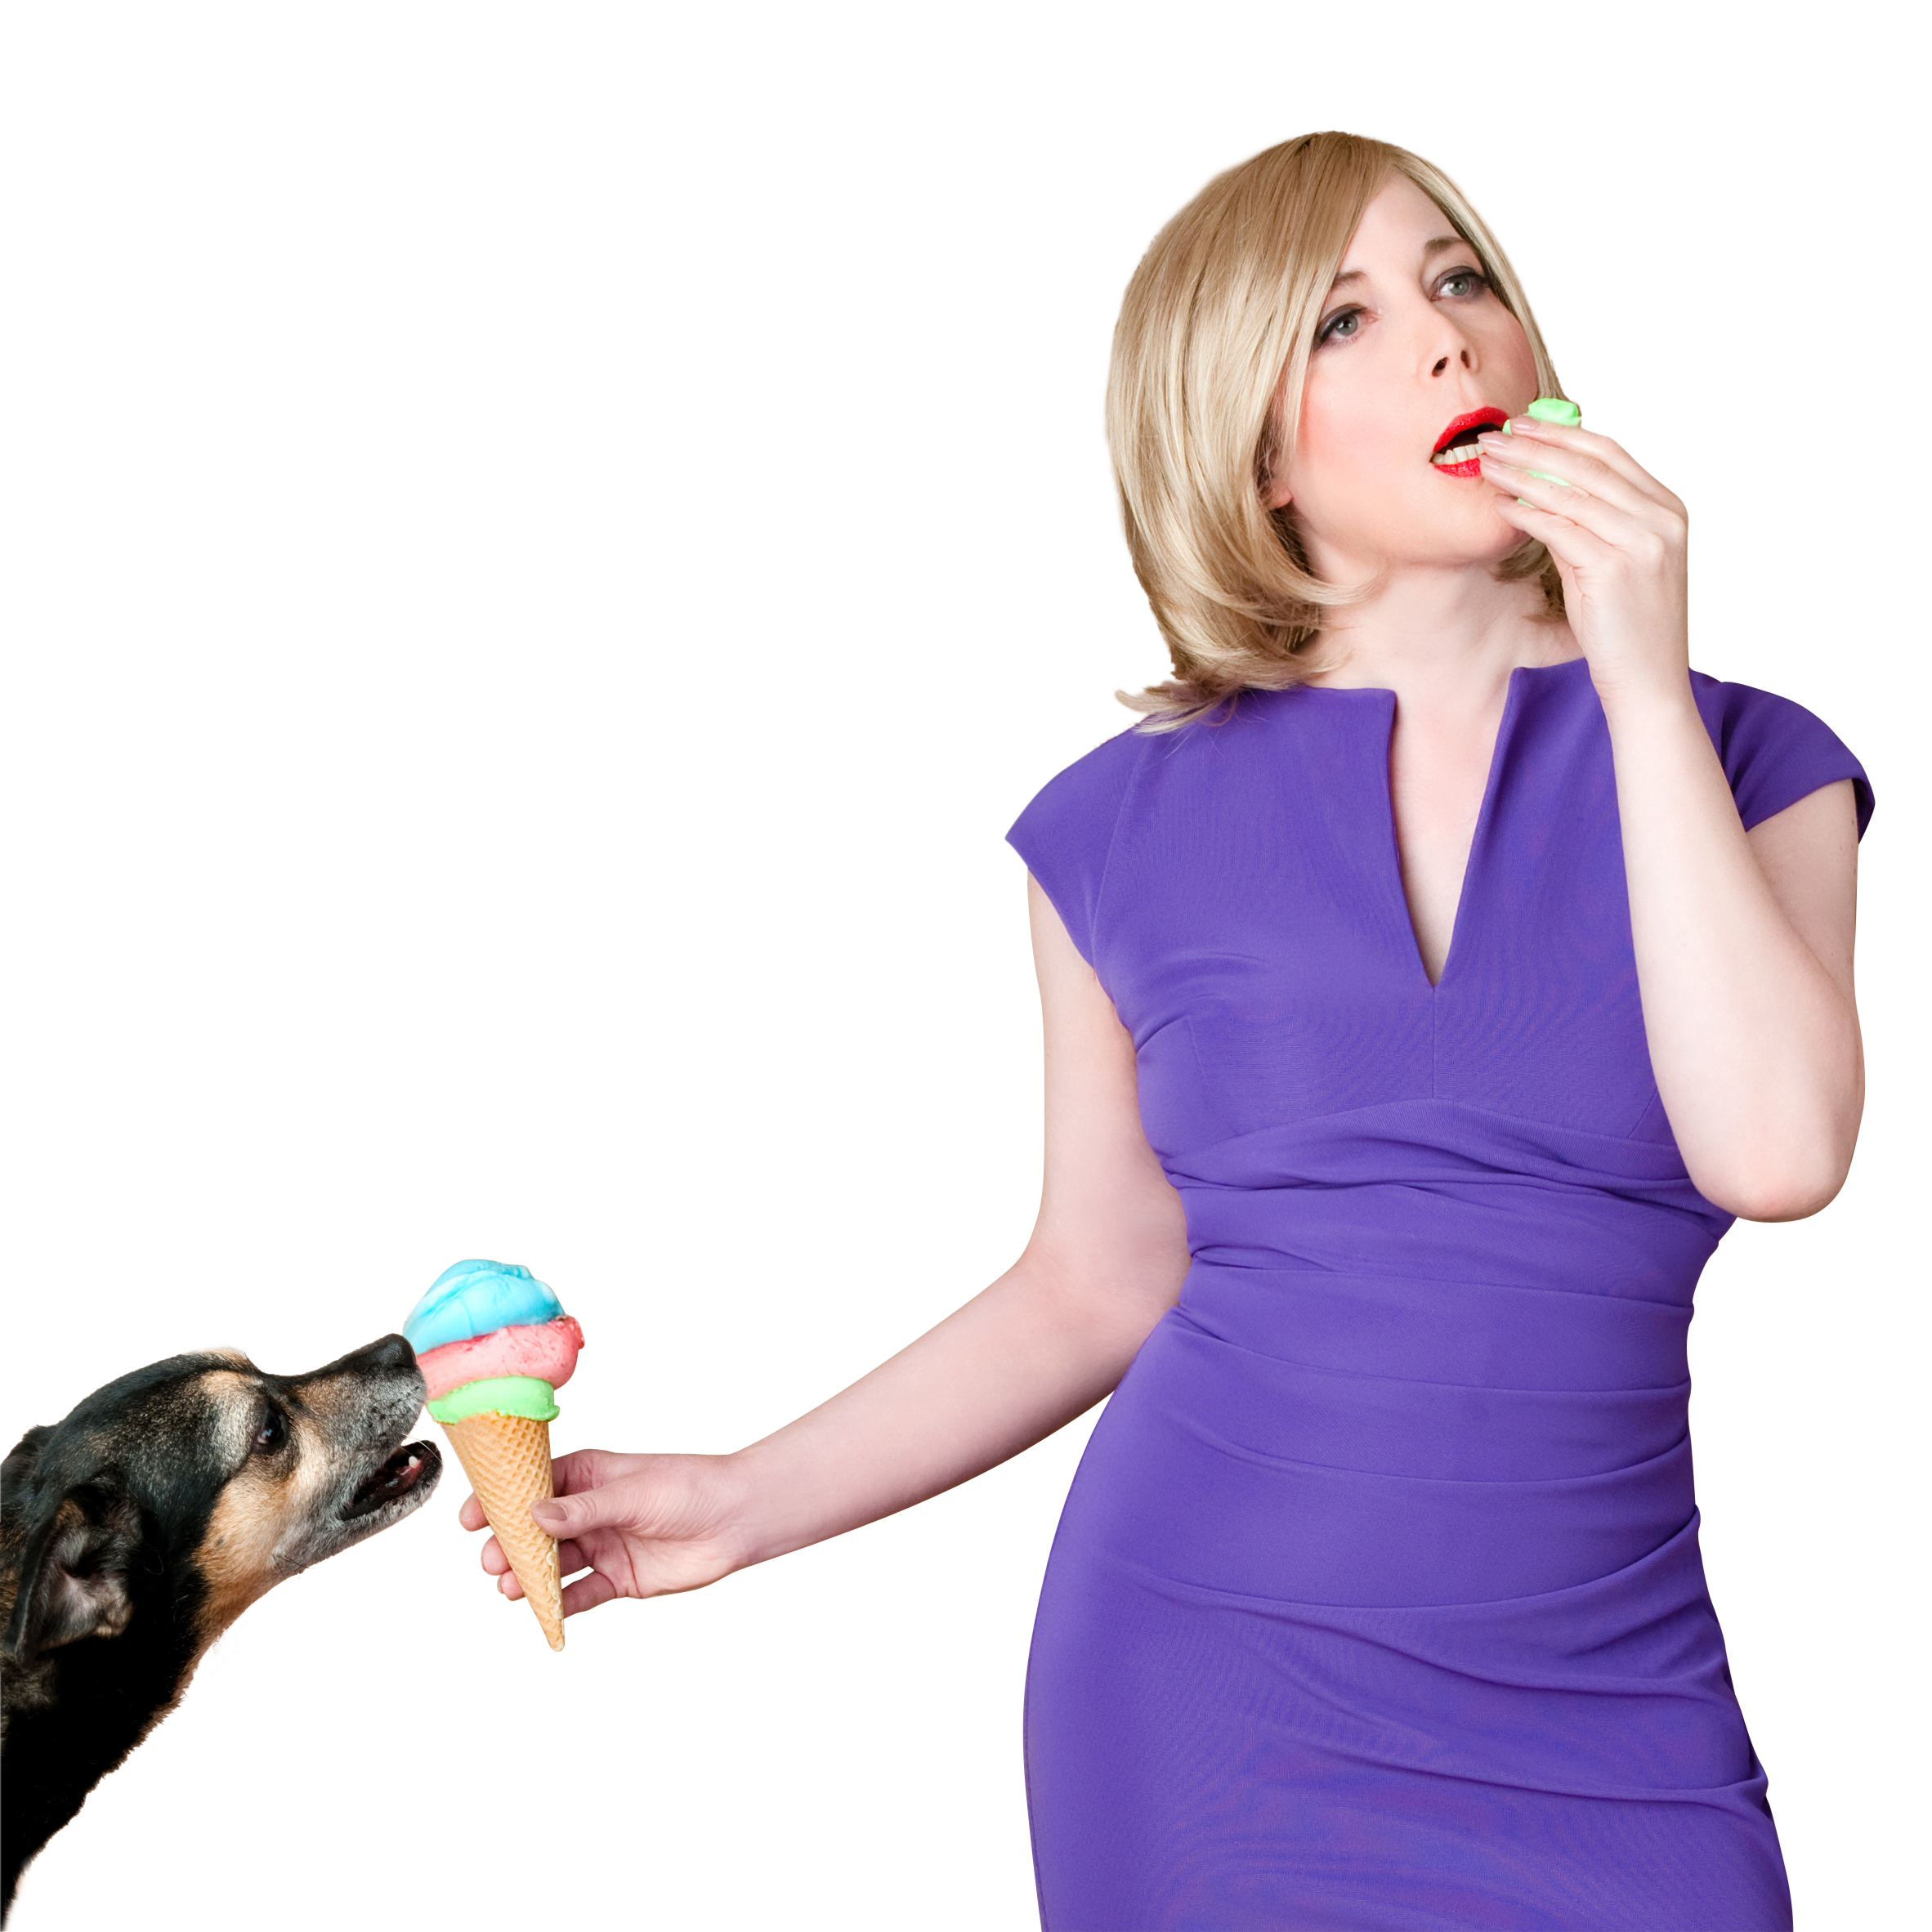 A Woman In A Purple Dress Eating Ice Cream